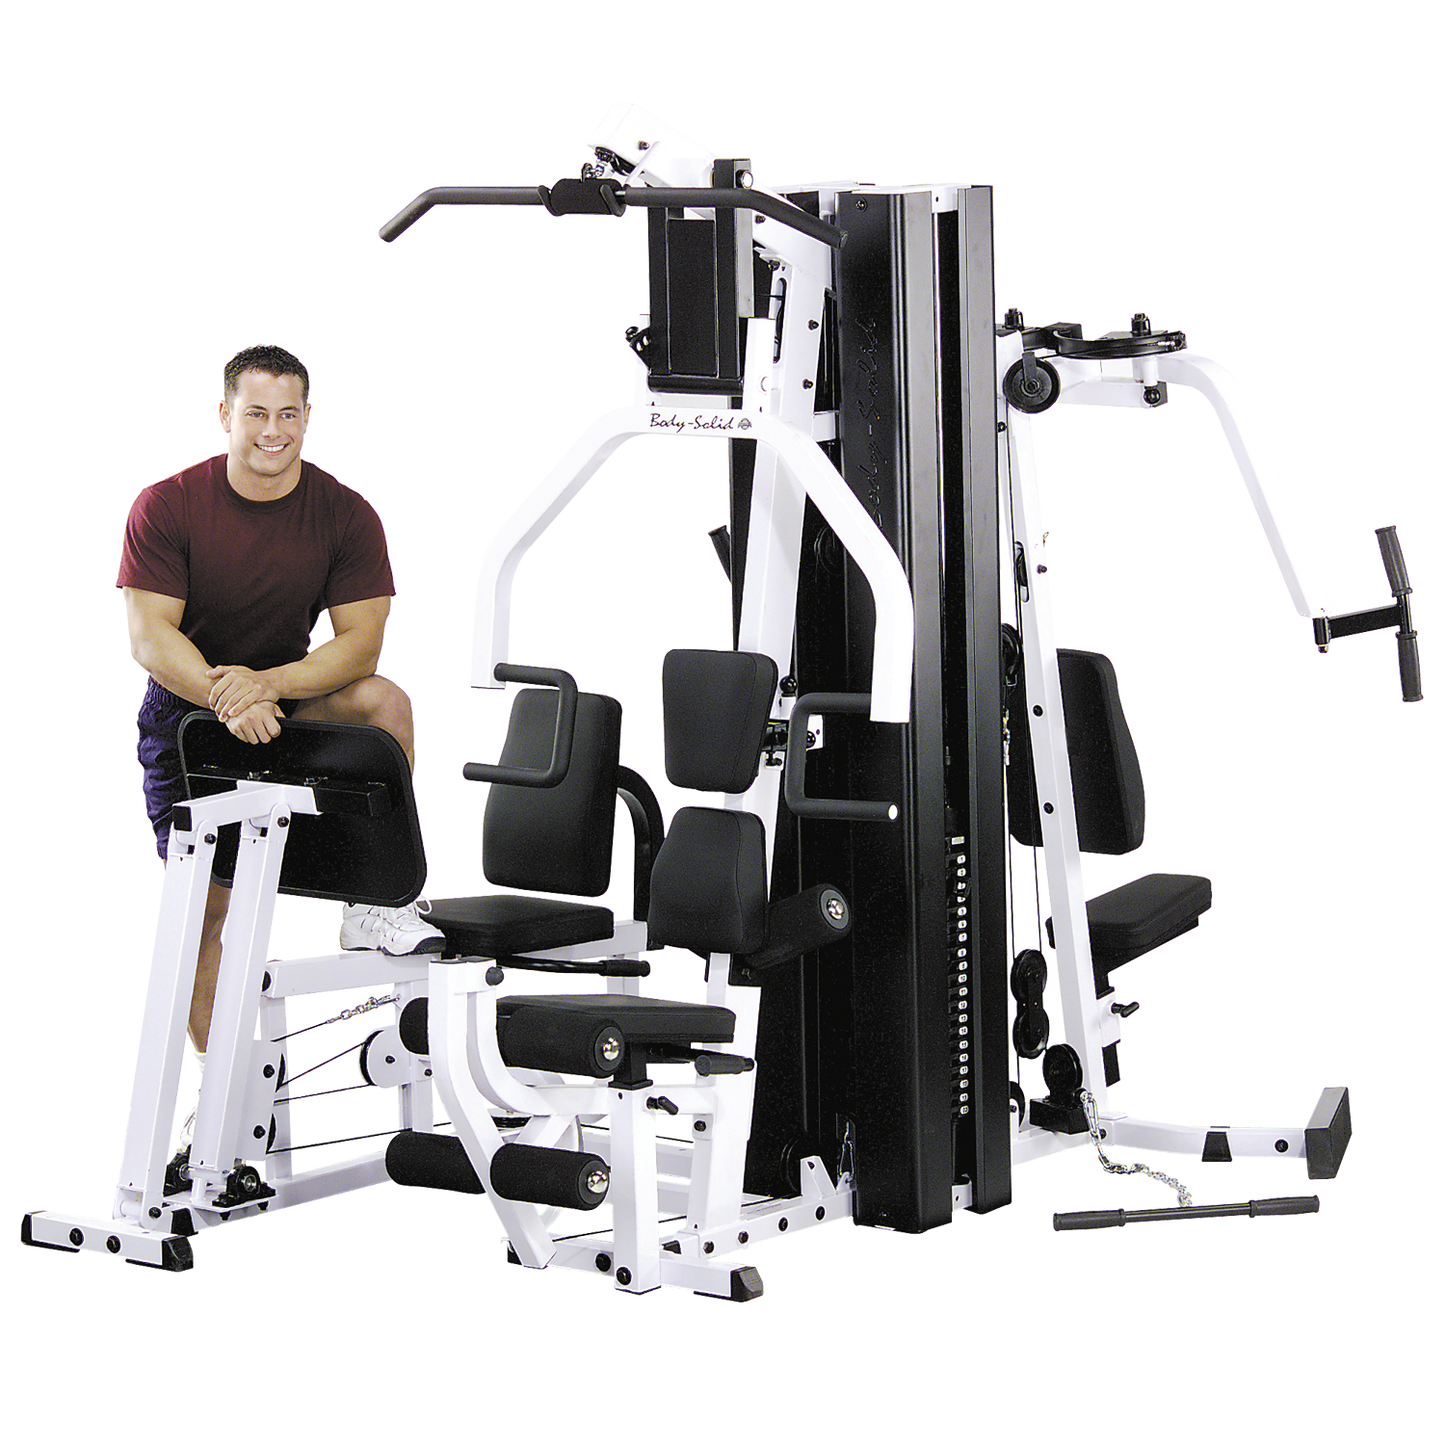 Body-Solid EXM3000LPS Multi-Station Selectorized Gym